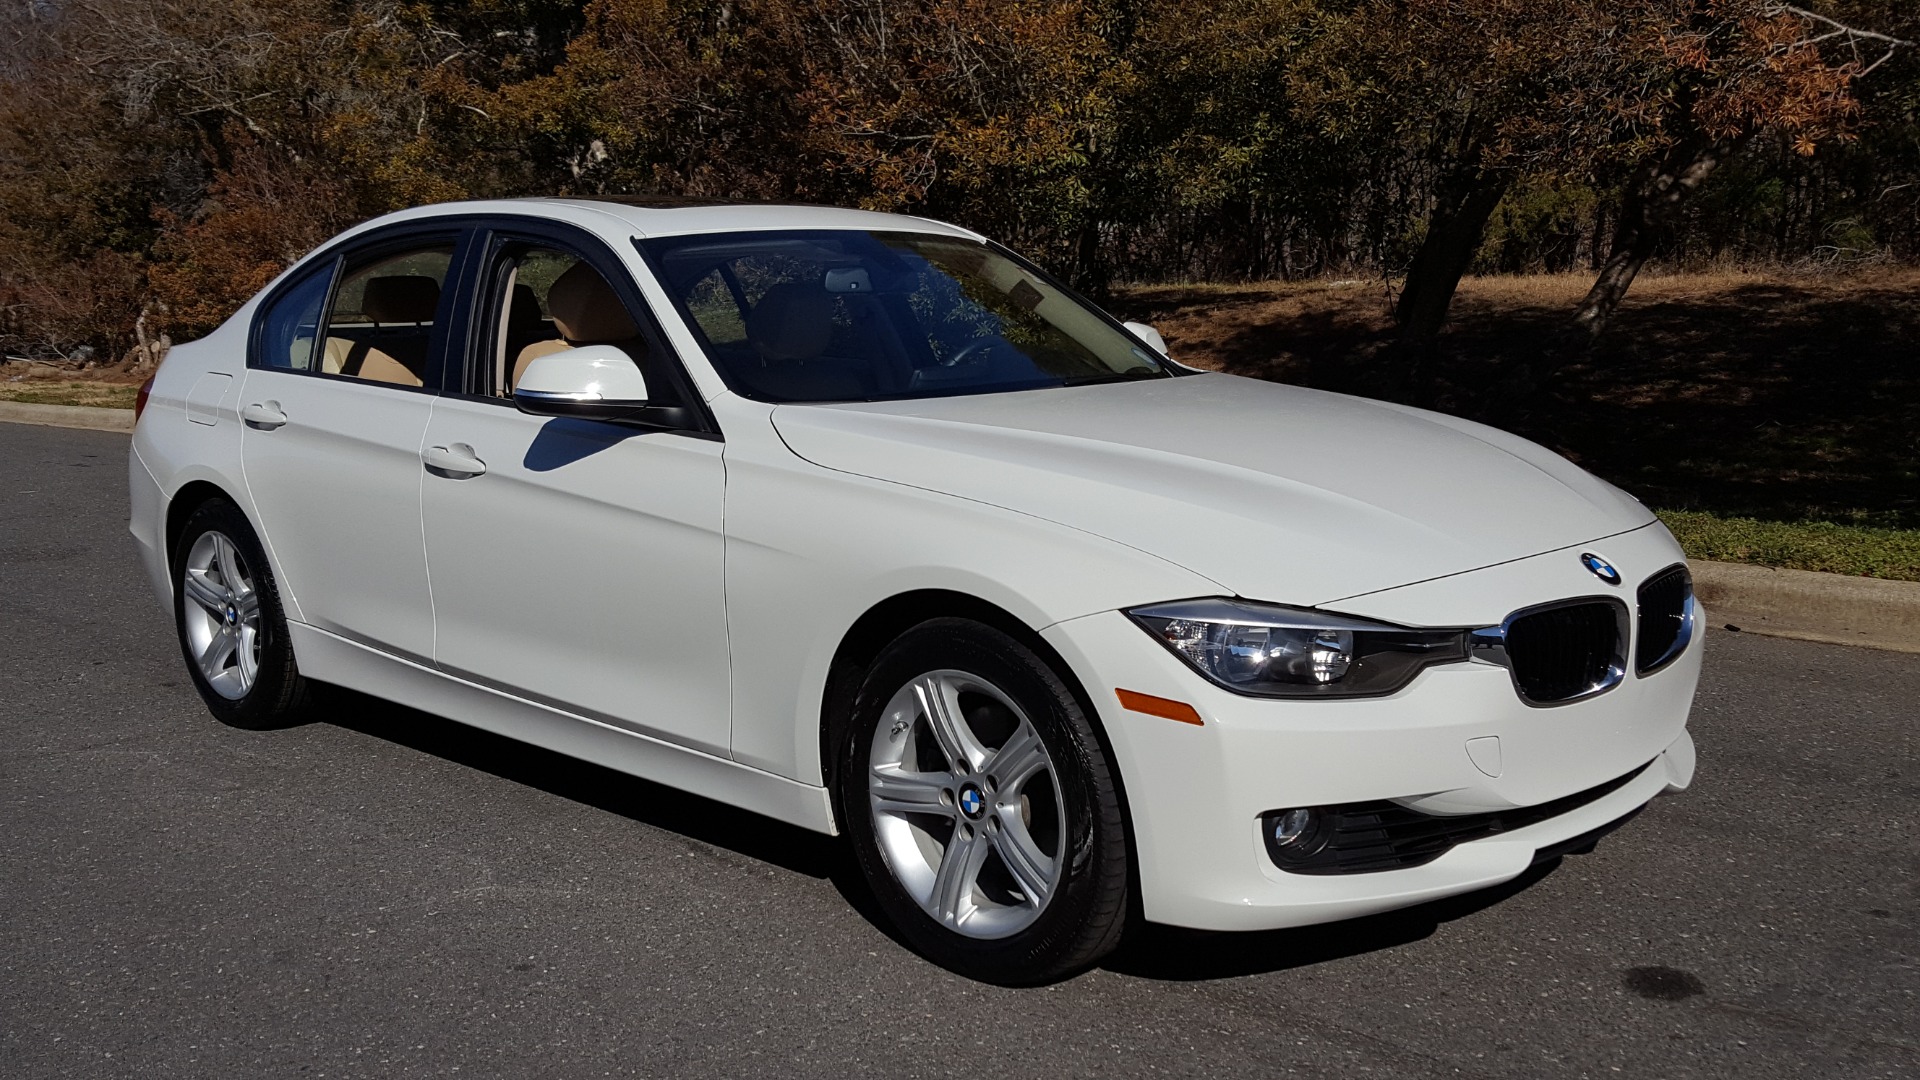 Used 2015 BMW 3 SERIES 328I SEDAN / SUNROOF / LEATHER / 8-SPEED AUTO / RWD for sale Sold at Formula Imports in Charlotte NC 28227 4